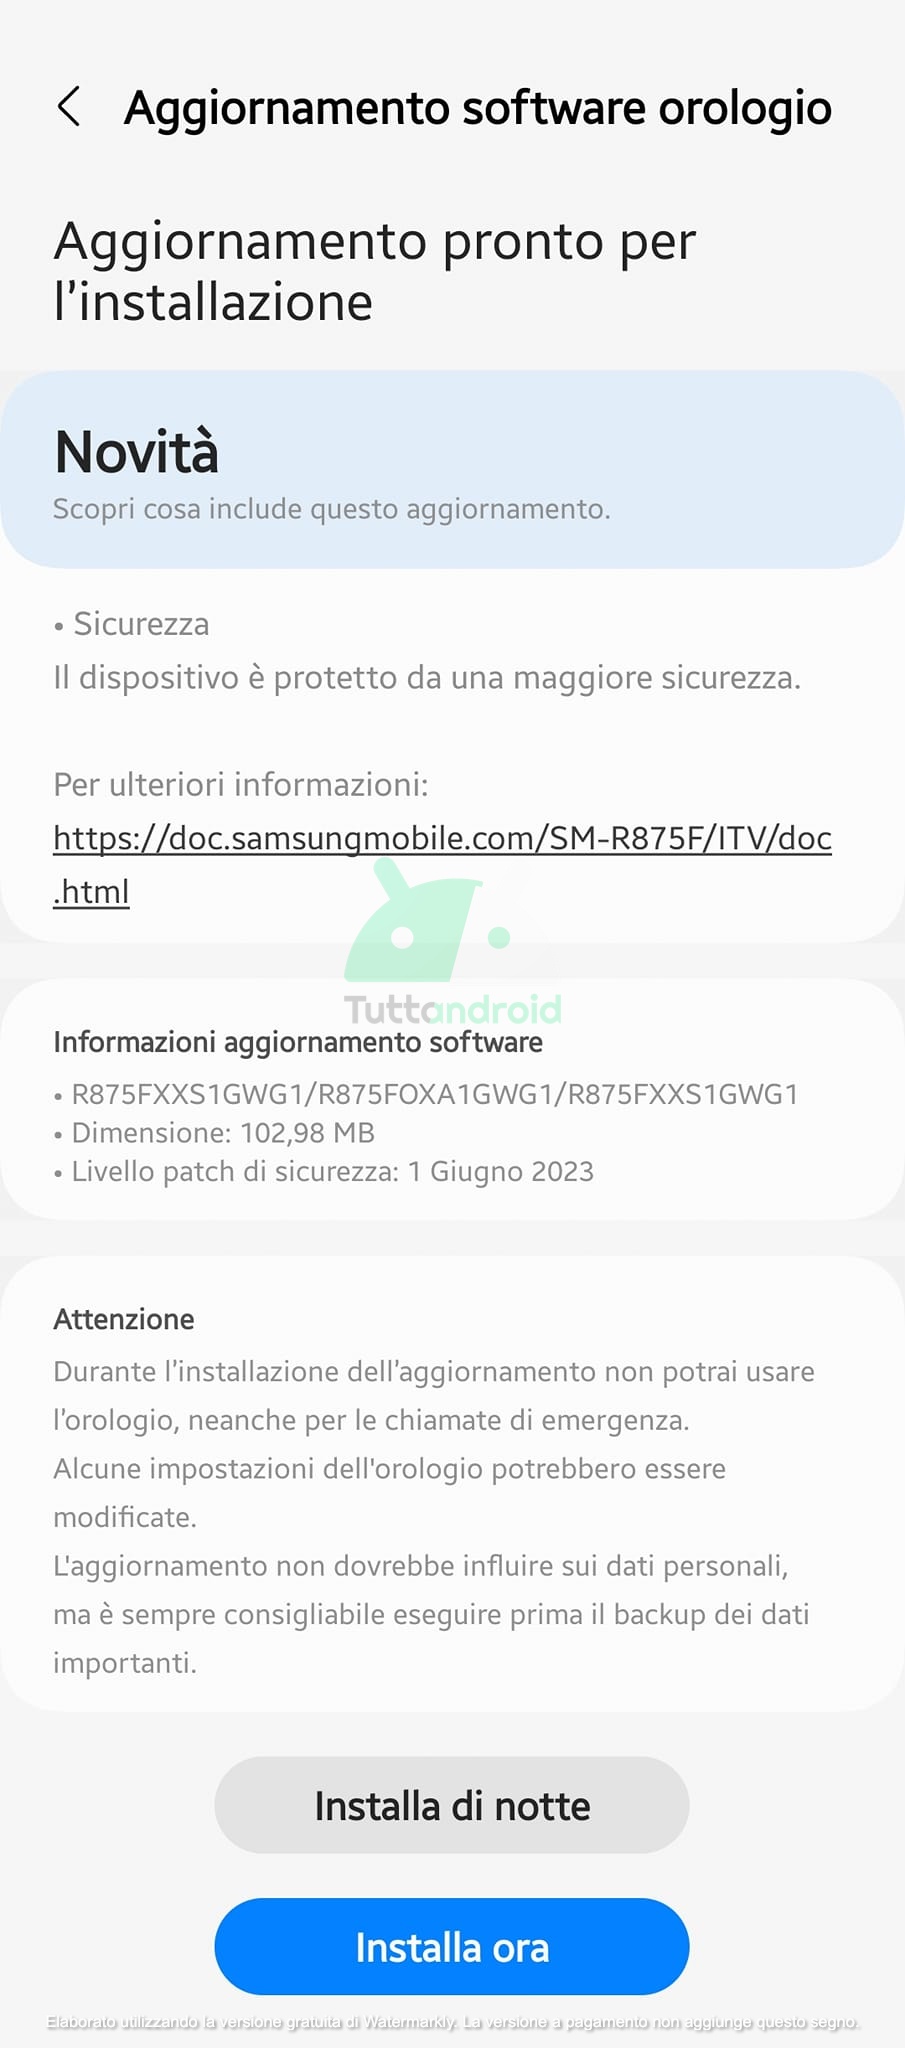 Samsung Galaxy Watch4 receives a new software update in Italy